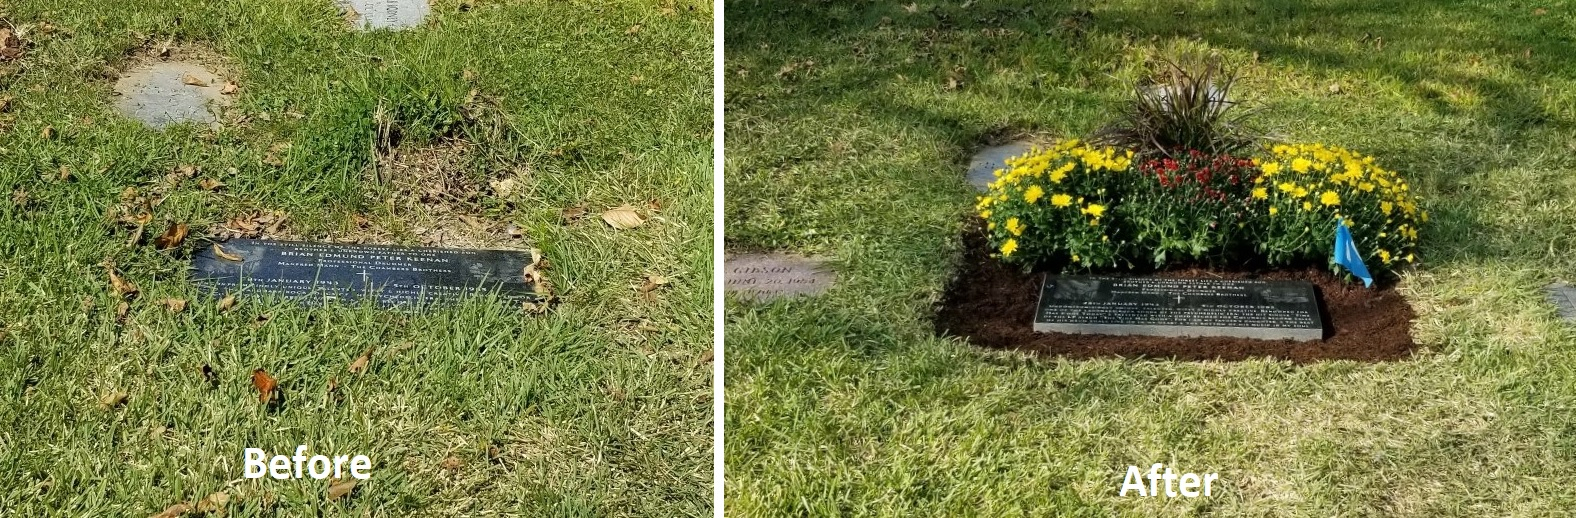 Before and After Gravestone